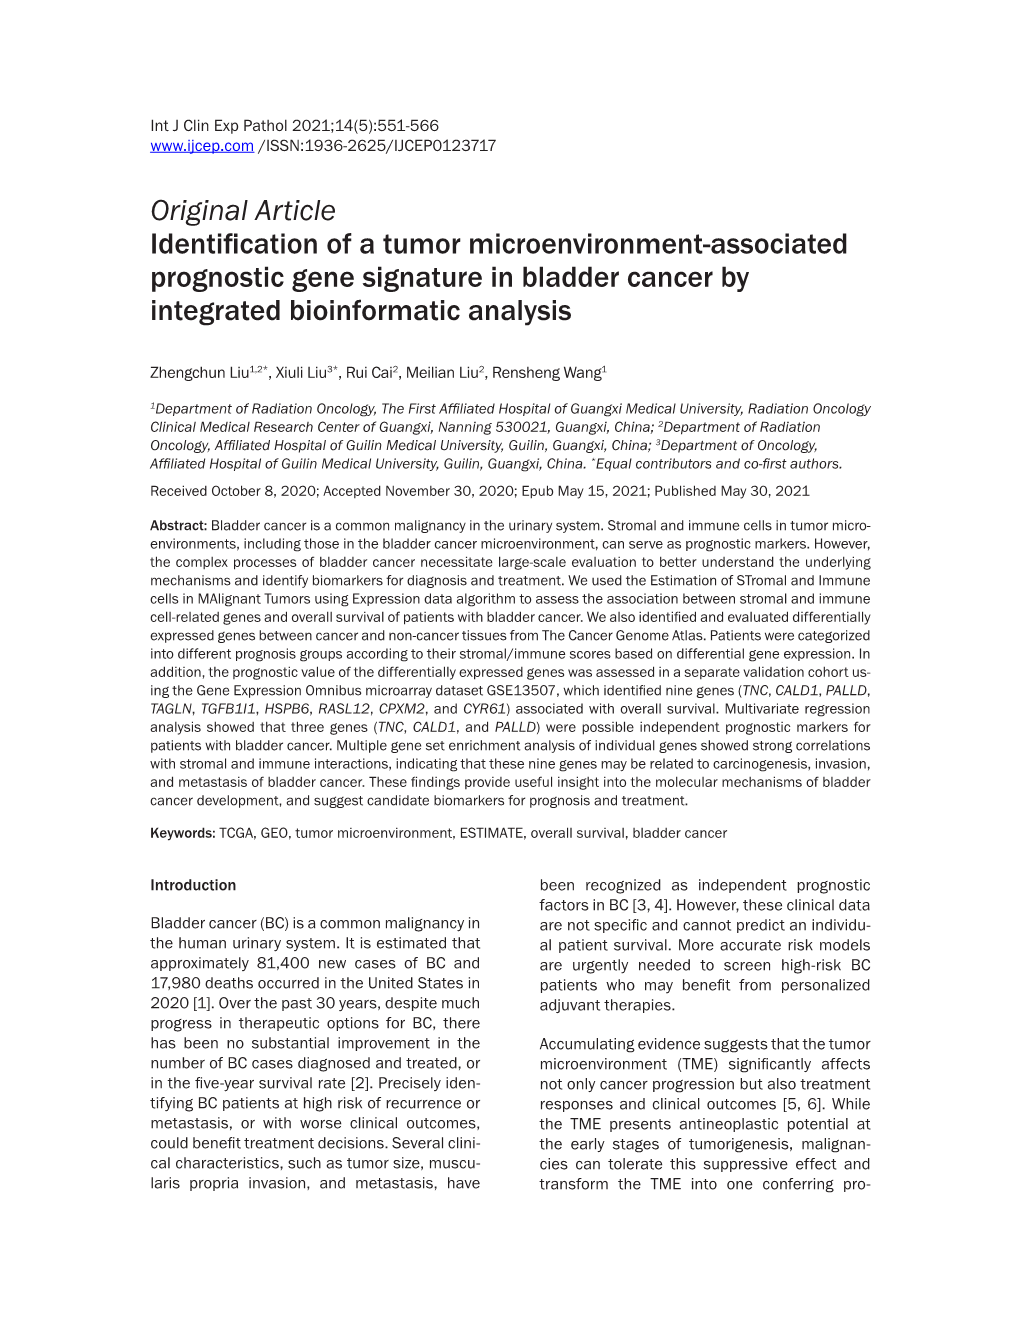 Original Article Identification of a Tumor Microenvironment-Associated Prognostic Gene Signature in Bladder Cancer by Integrated Bioinformatic Analysis